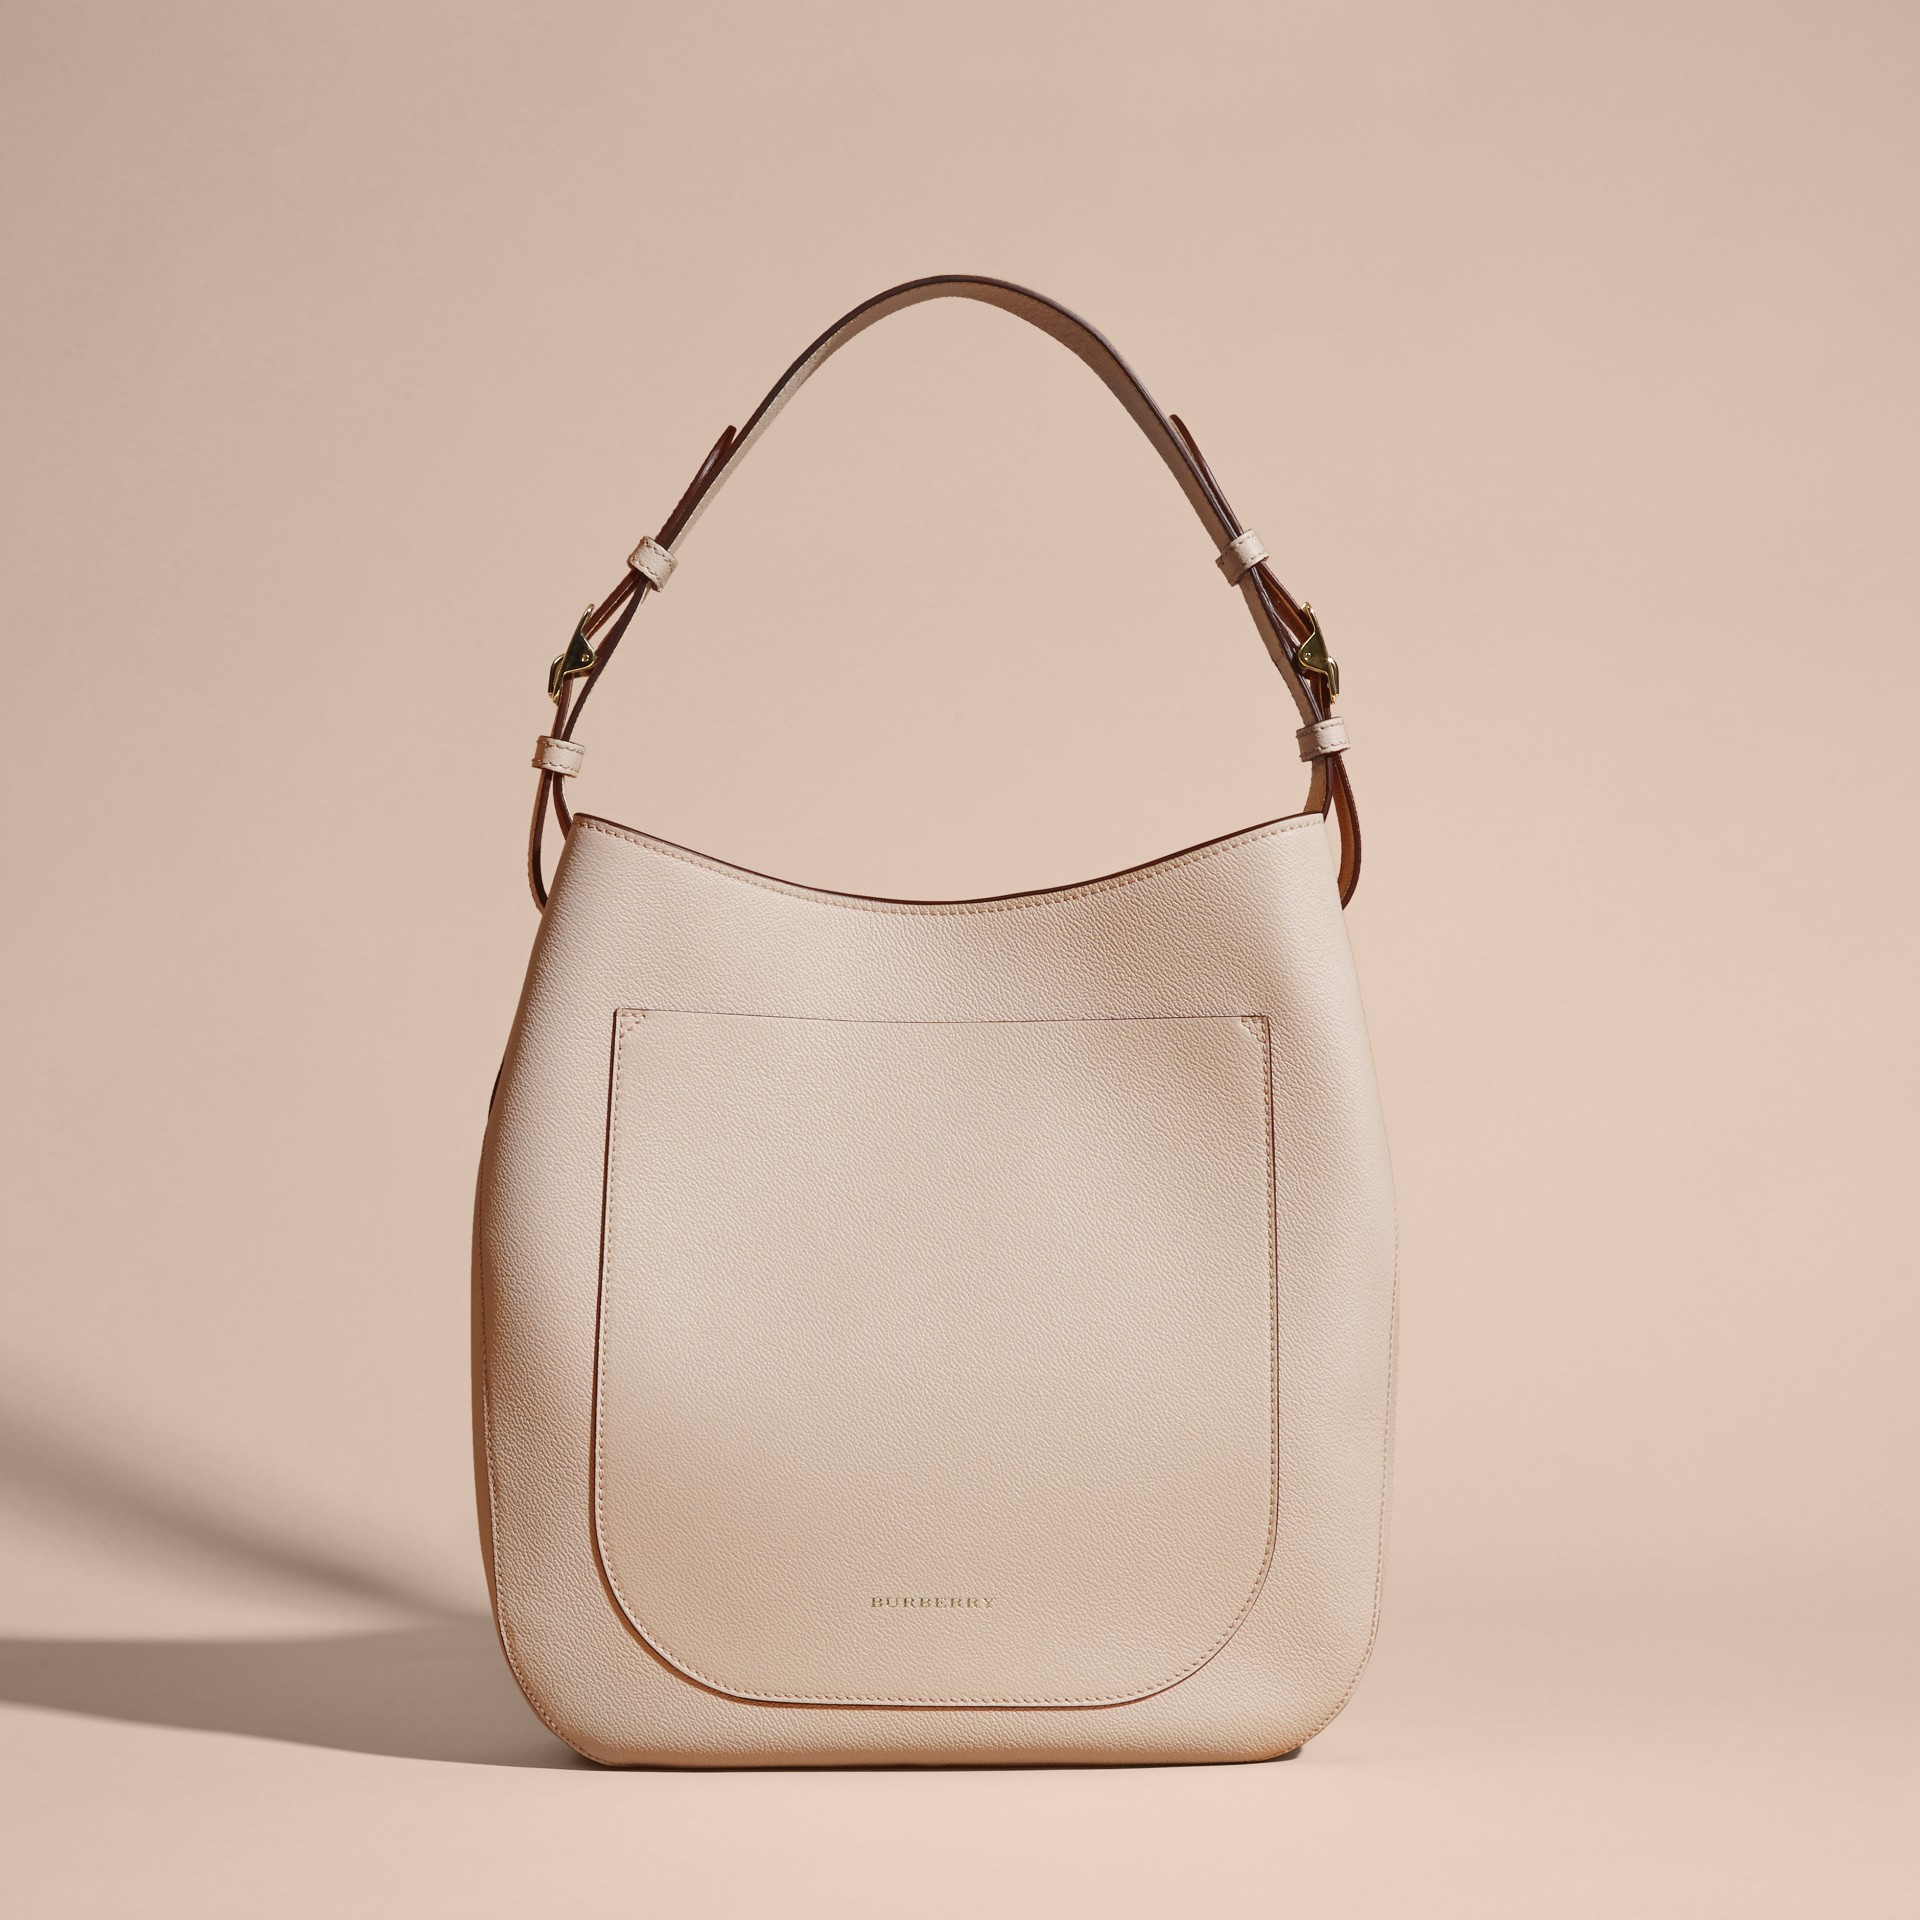 Textured Leather Shoulder Bag in Limestone - Women | Burberry United States